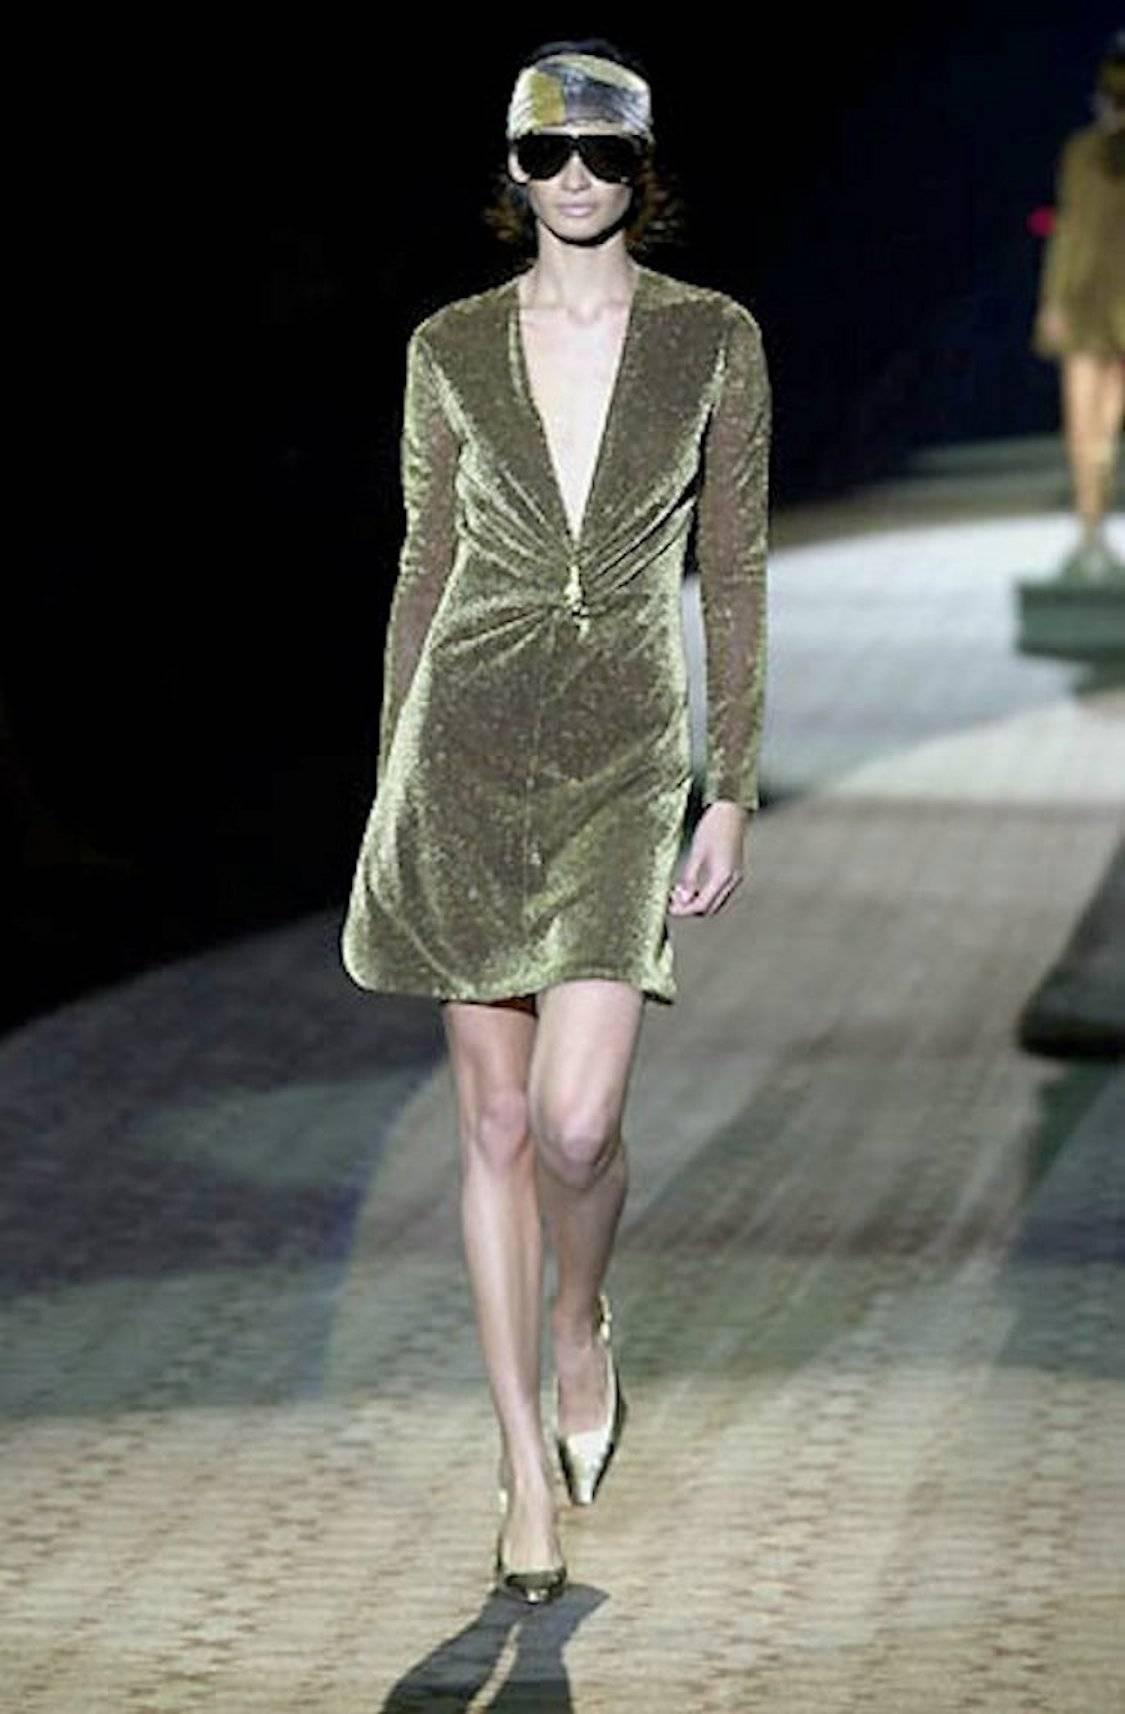 UNWORN Gucci By Tom Ford 2000 Metallic Deep Plunging Evening Dress 42 In Good Condition For Sale In Switzerland, CH